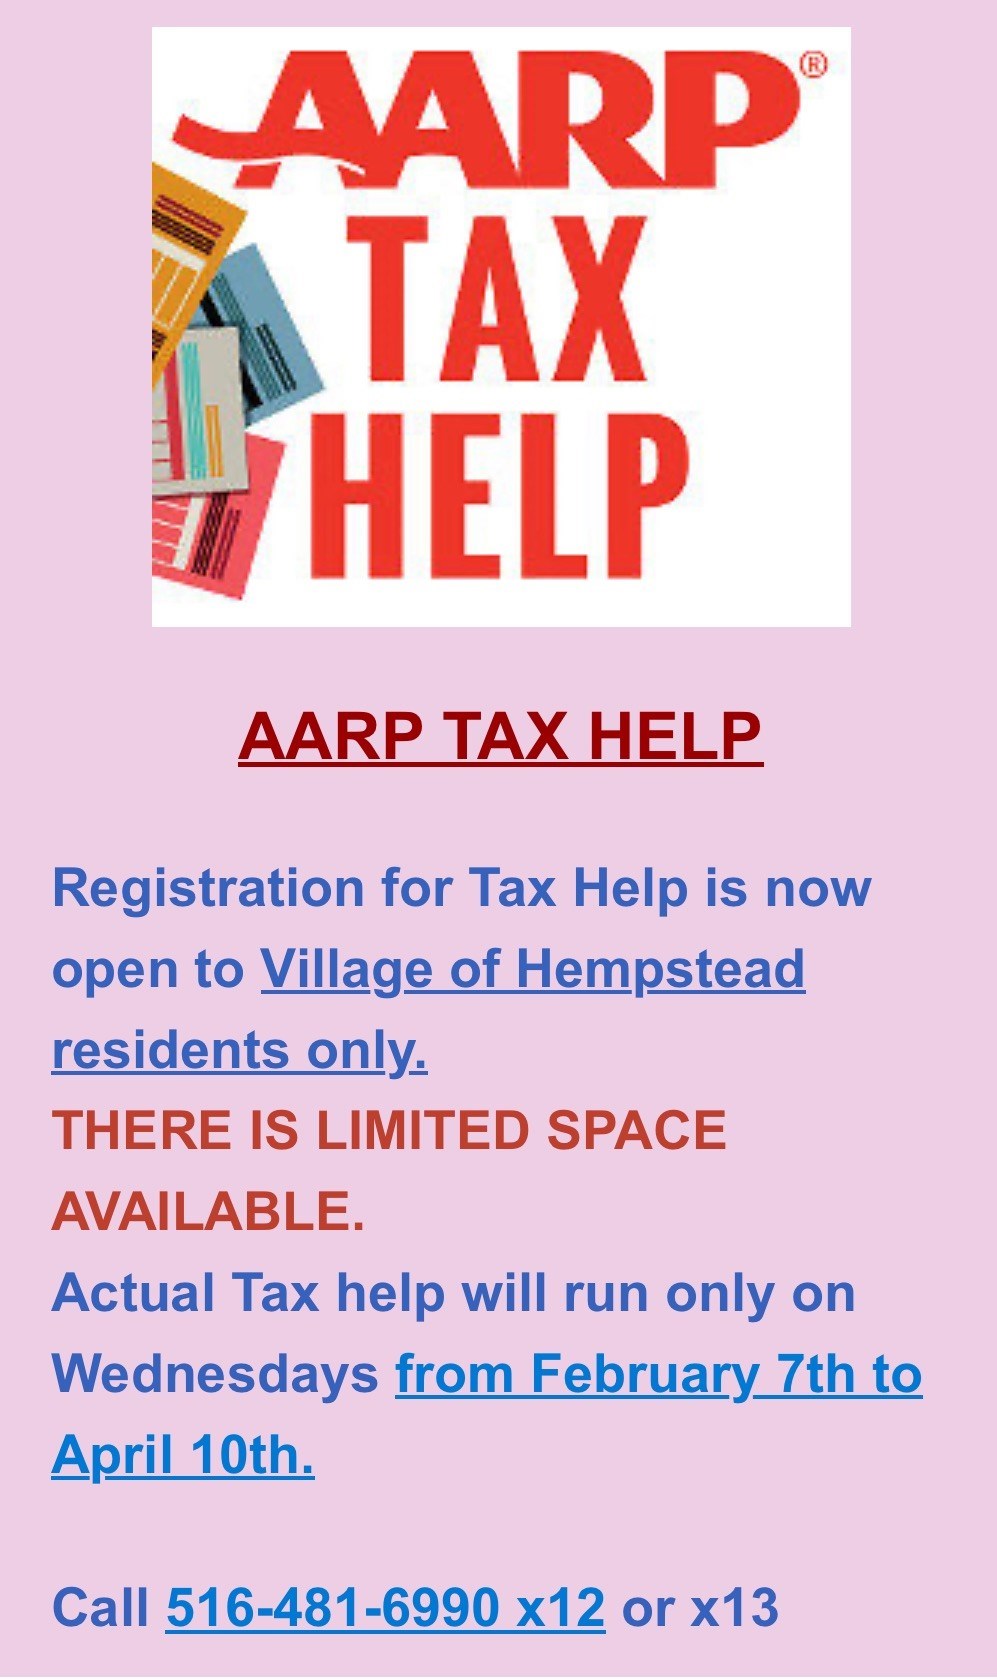 AARP Tax Help for Village of Hempstead Residents. Call 516-481-6990 x12 or x13 for more info